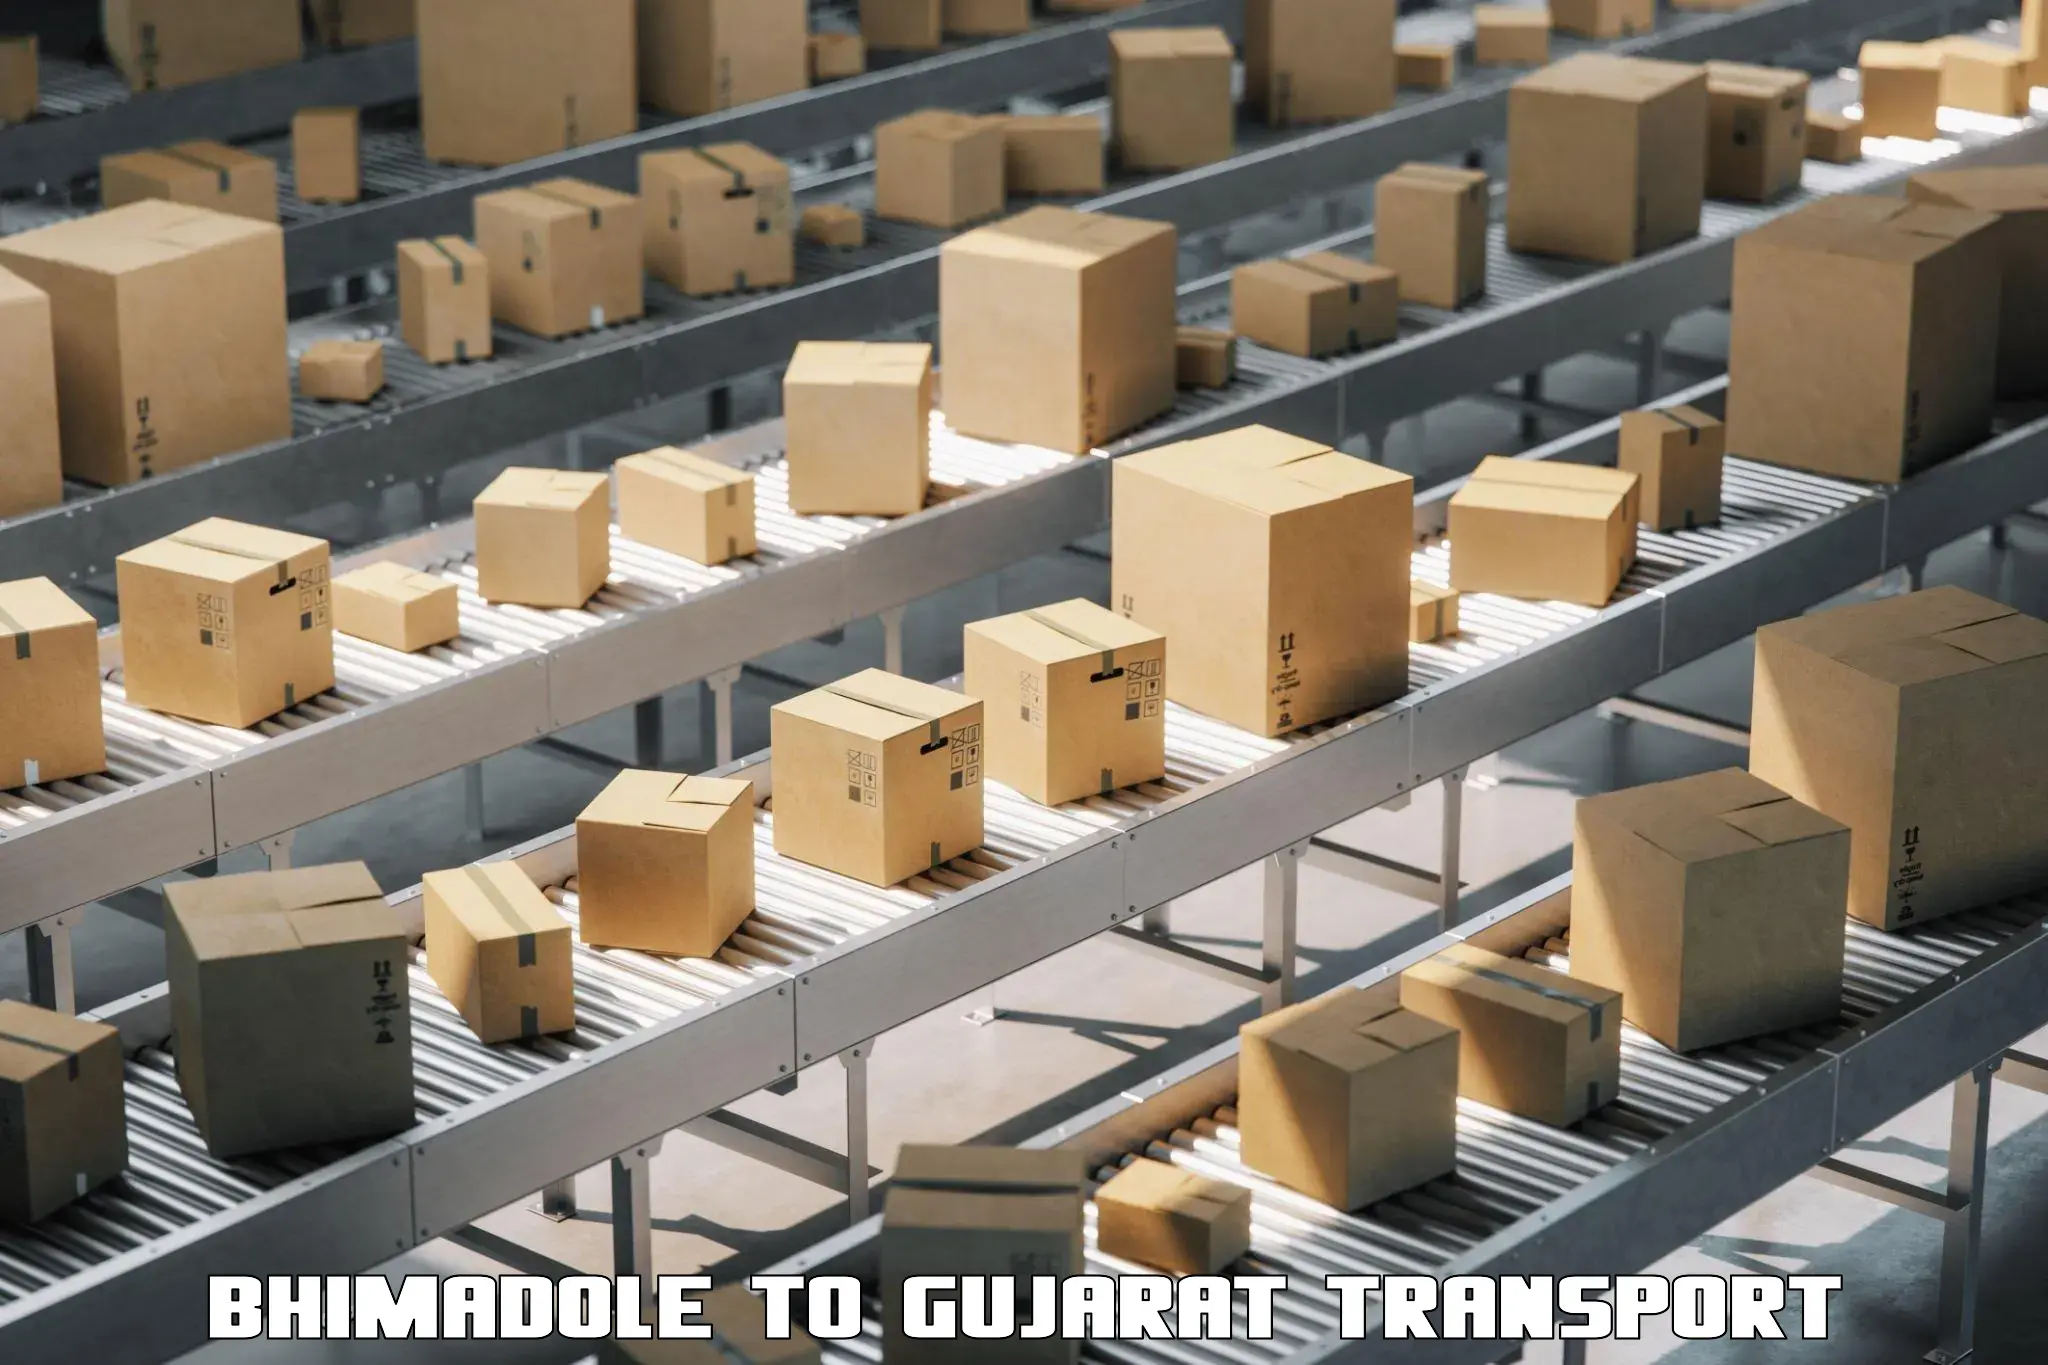 Container transport service Bhimadole to Gujarat